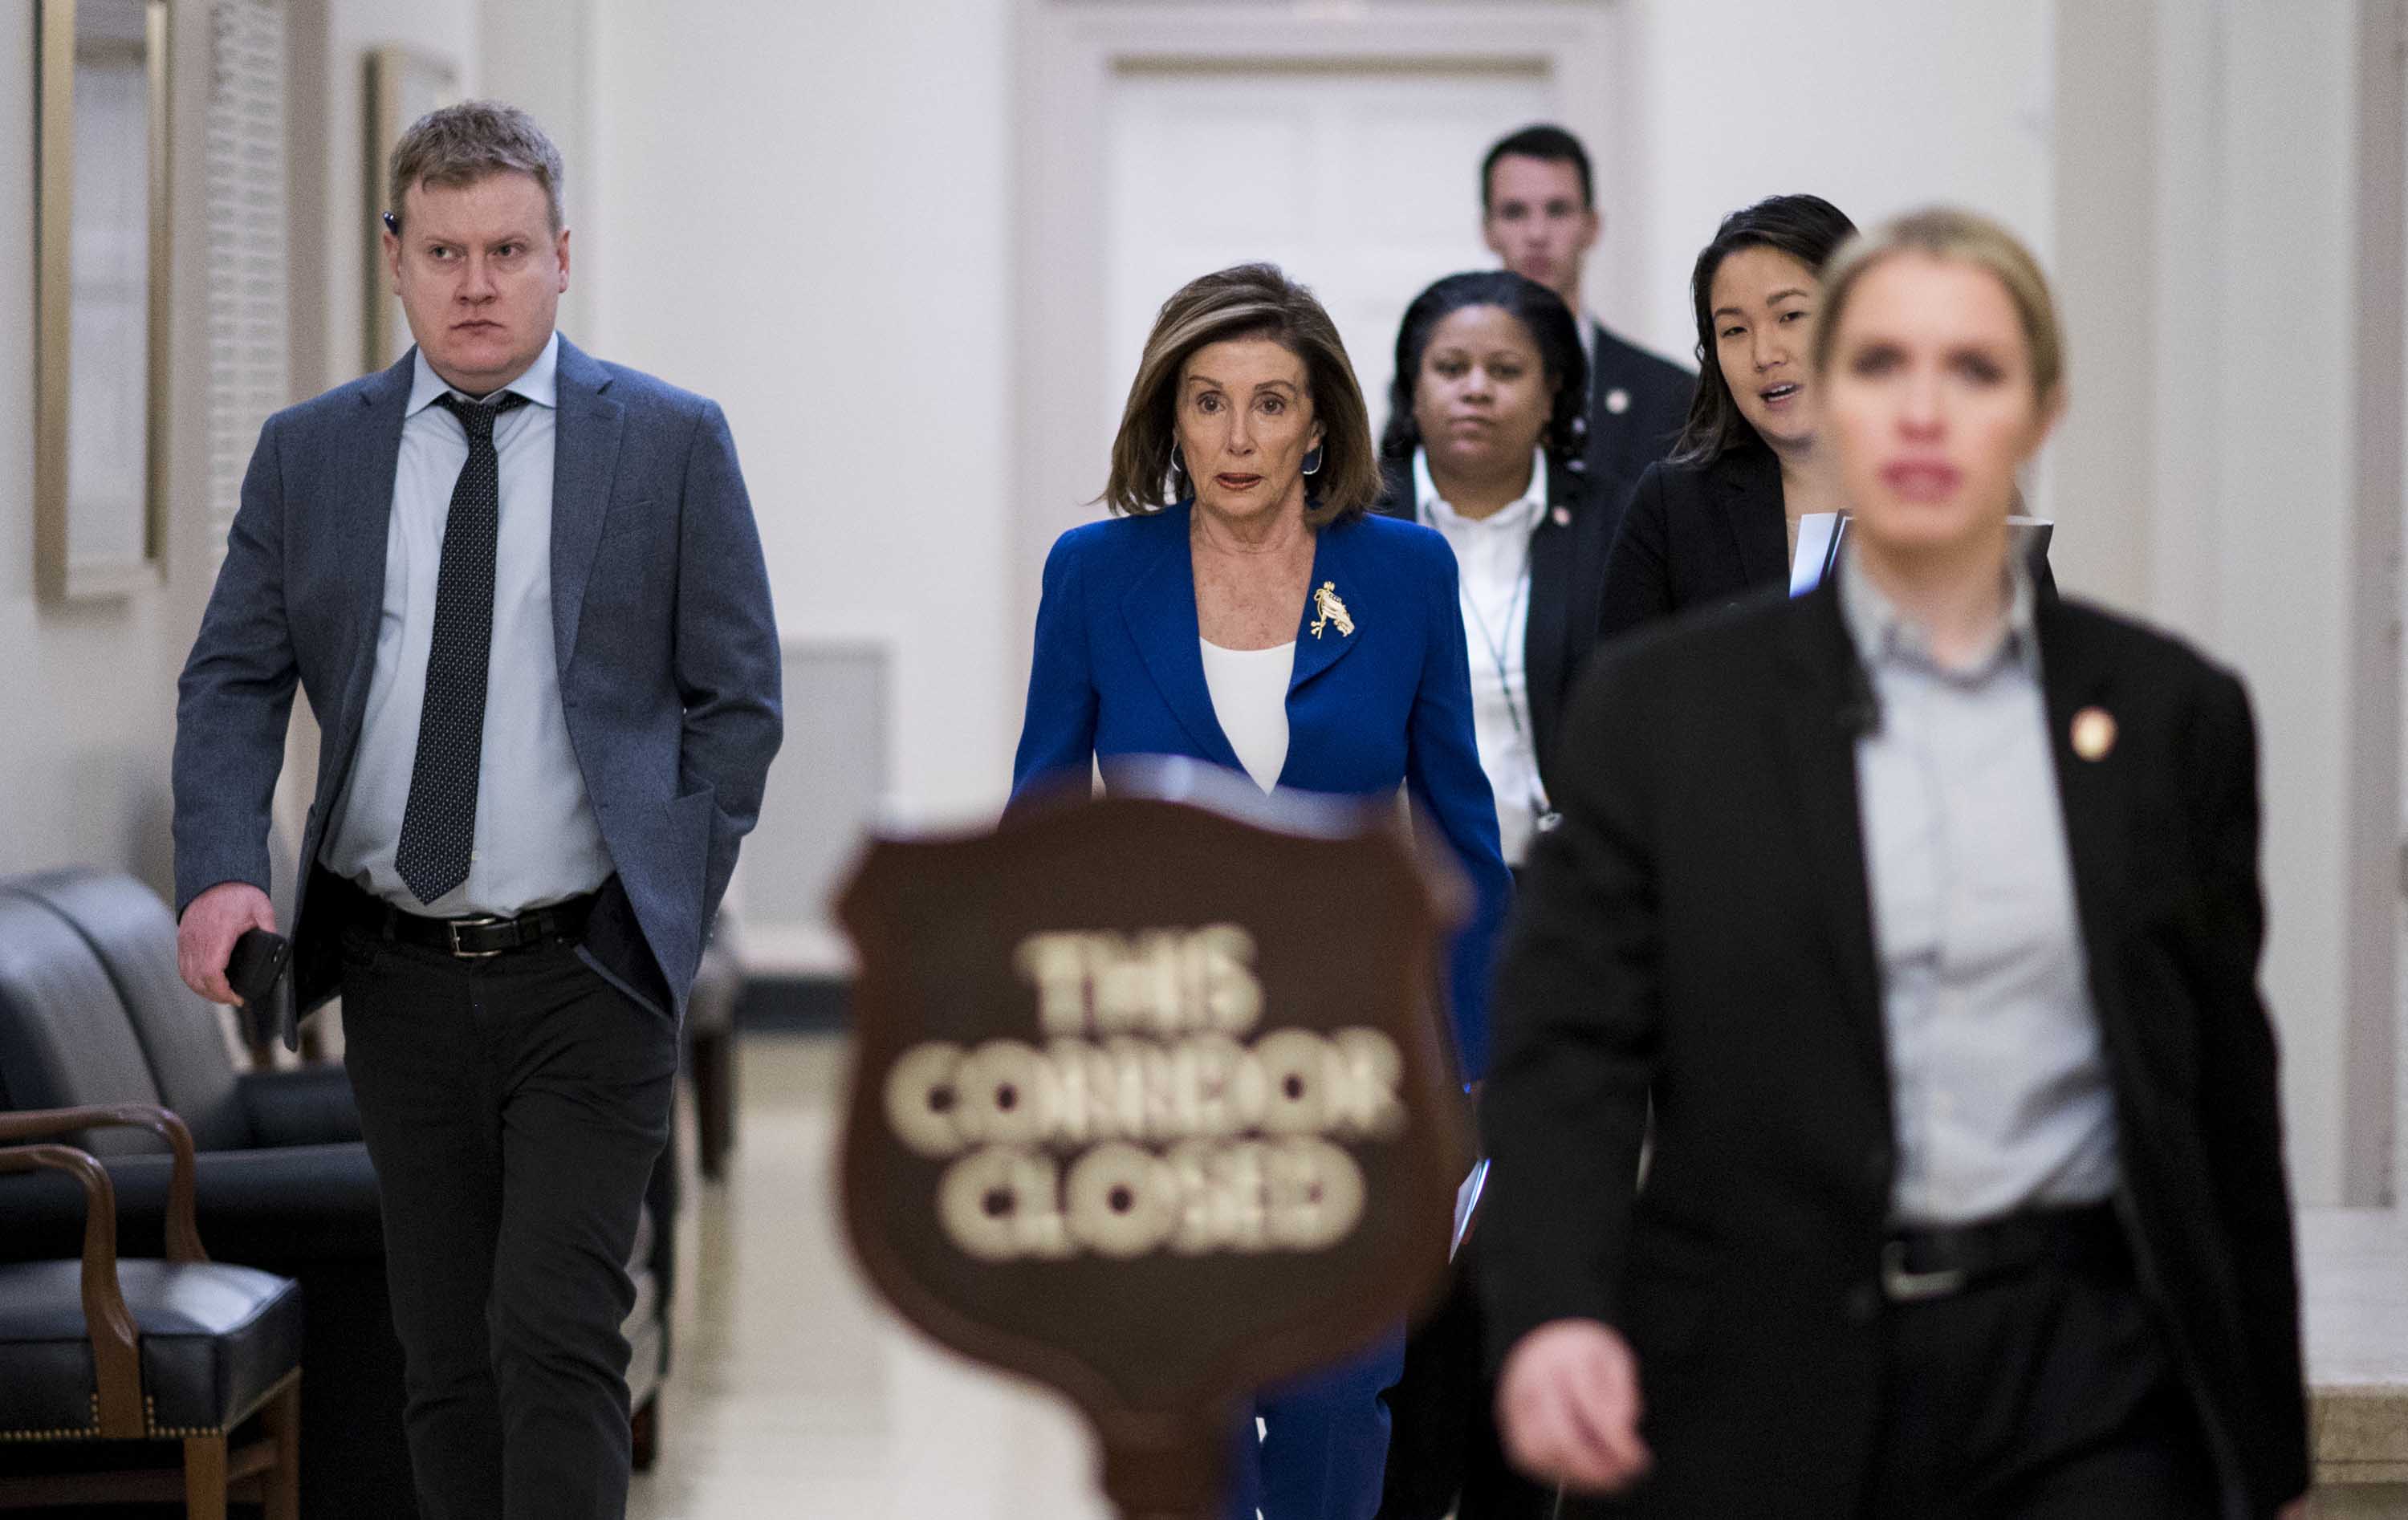 Speaker of the House Nancy Pelosi walks to the House Democrats caucus meeting in the Capitol on Wednesday.